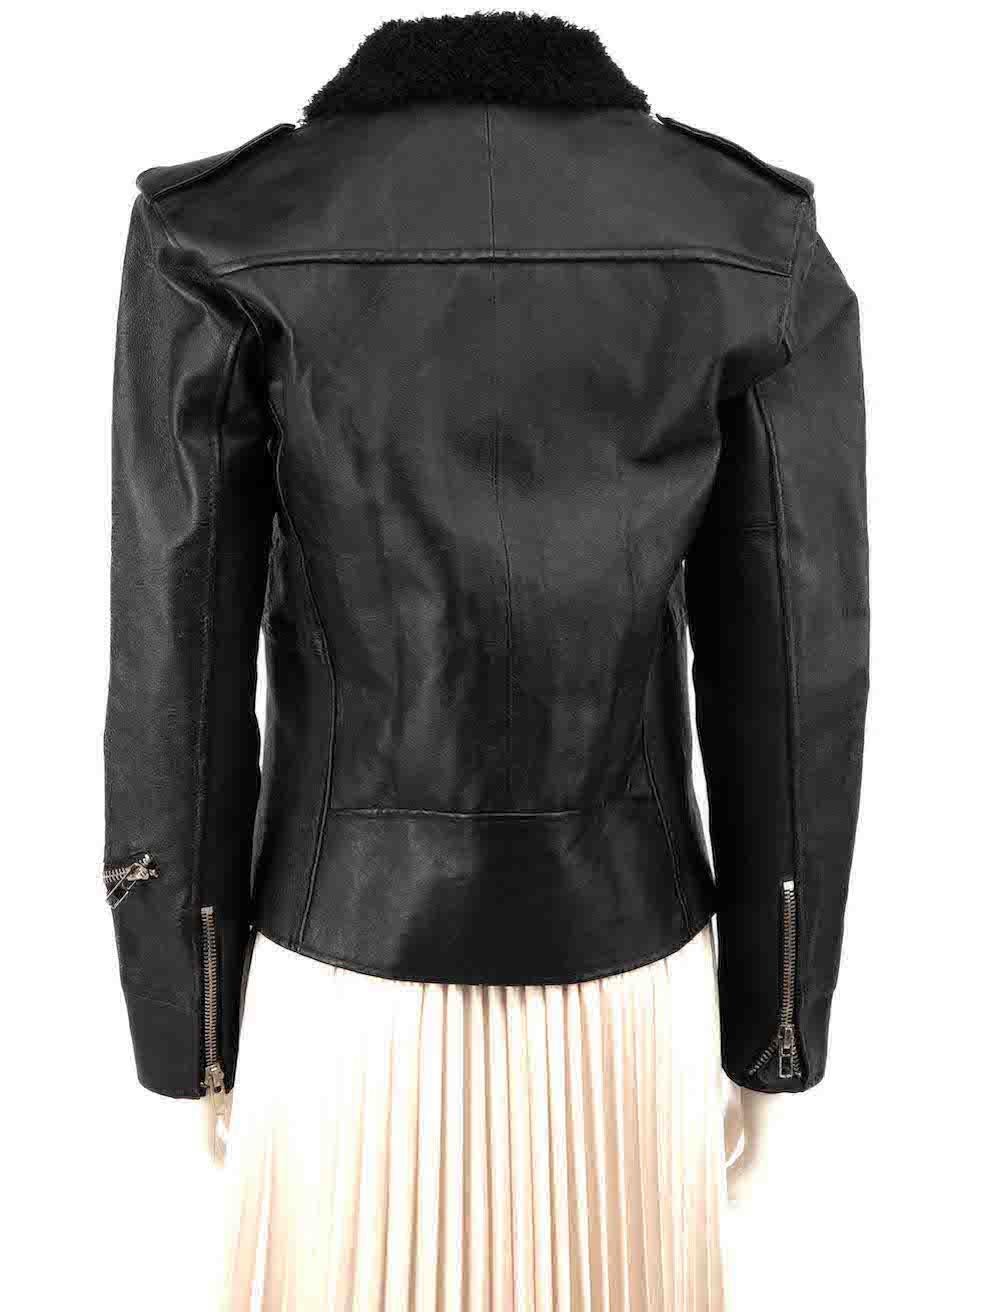 Deadwood Black Recycled Leather Biker Jacket Size S In Good Condition For Sale In London, GB